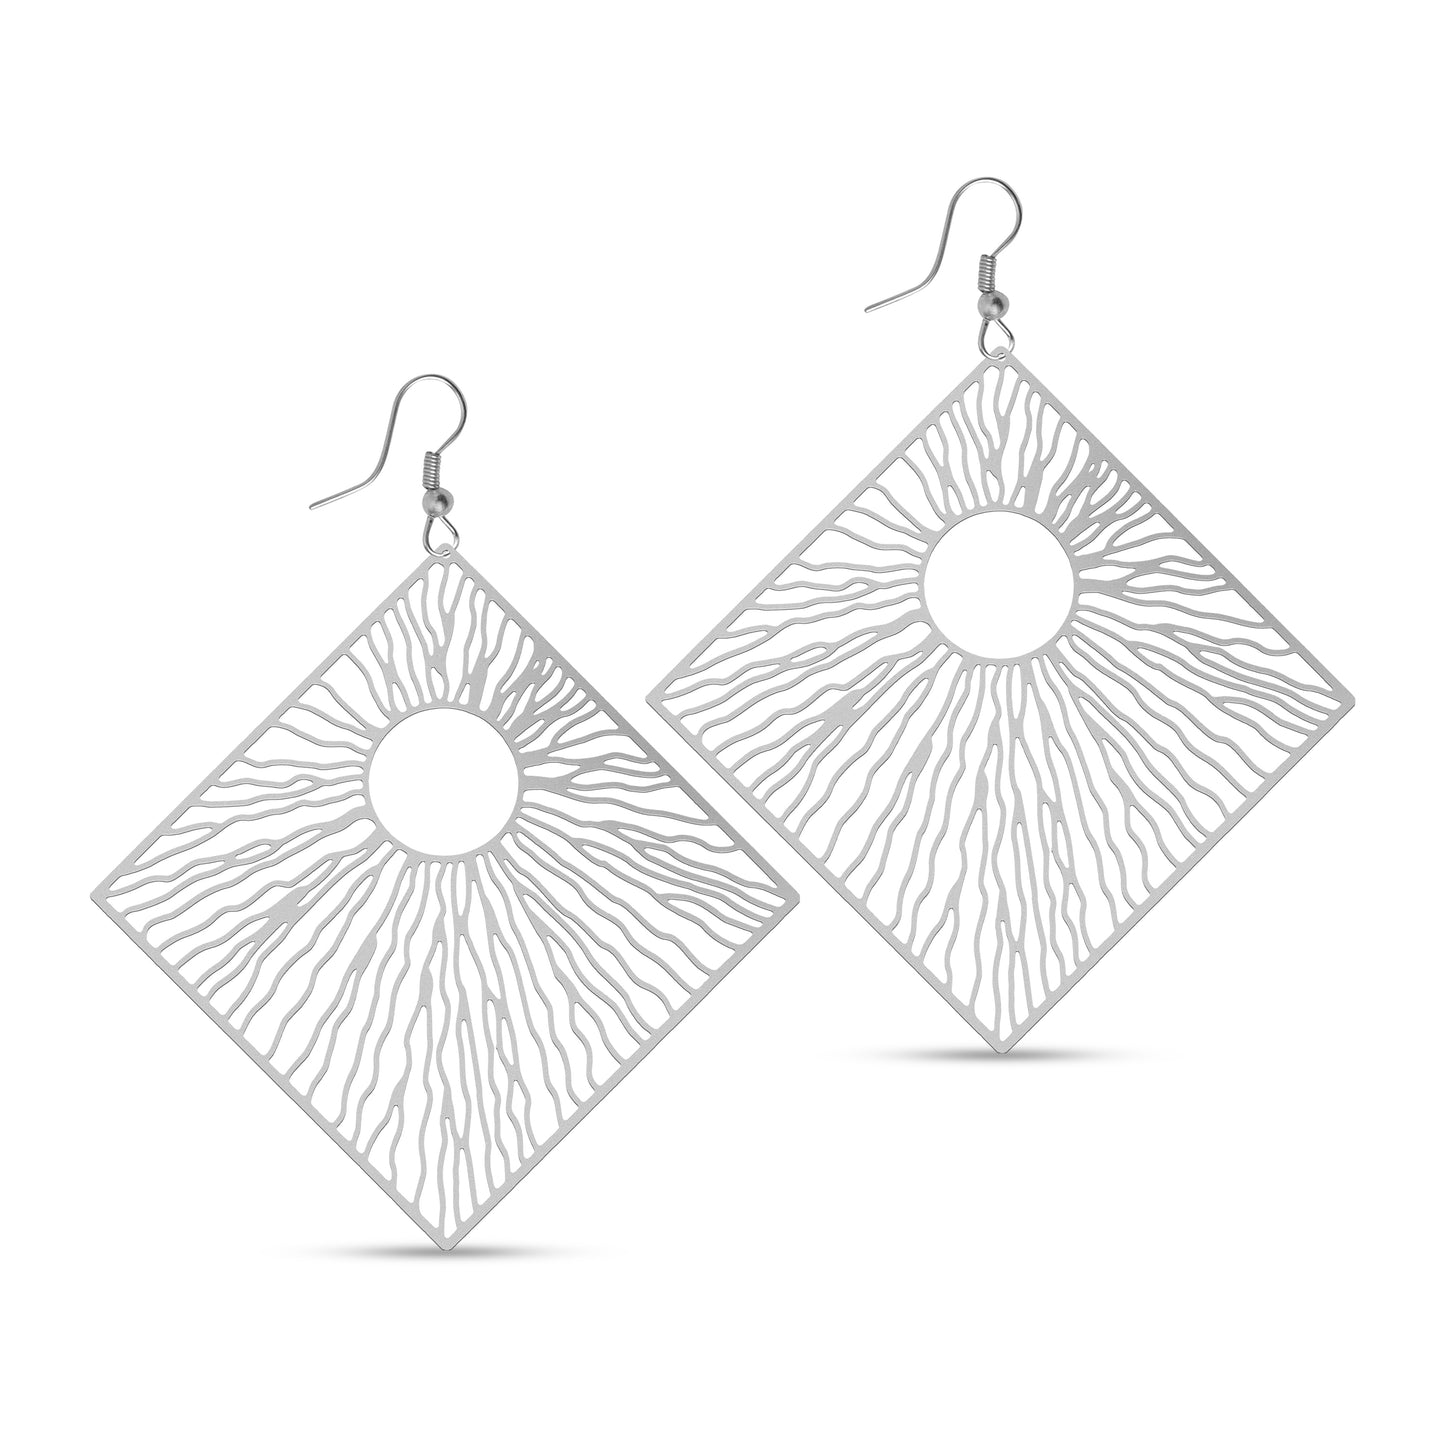 Handcrafted & Silver-Plated Brass Earrings For Women